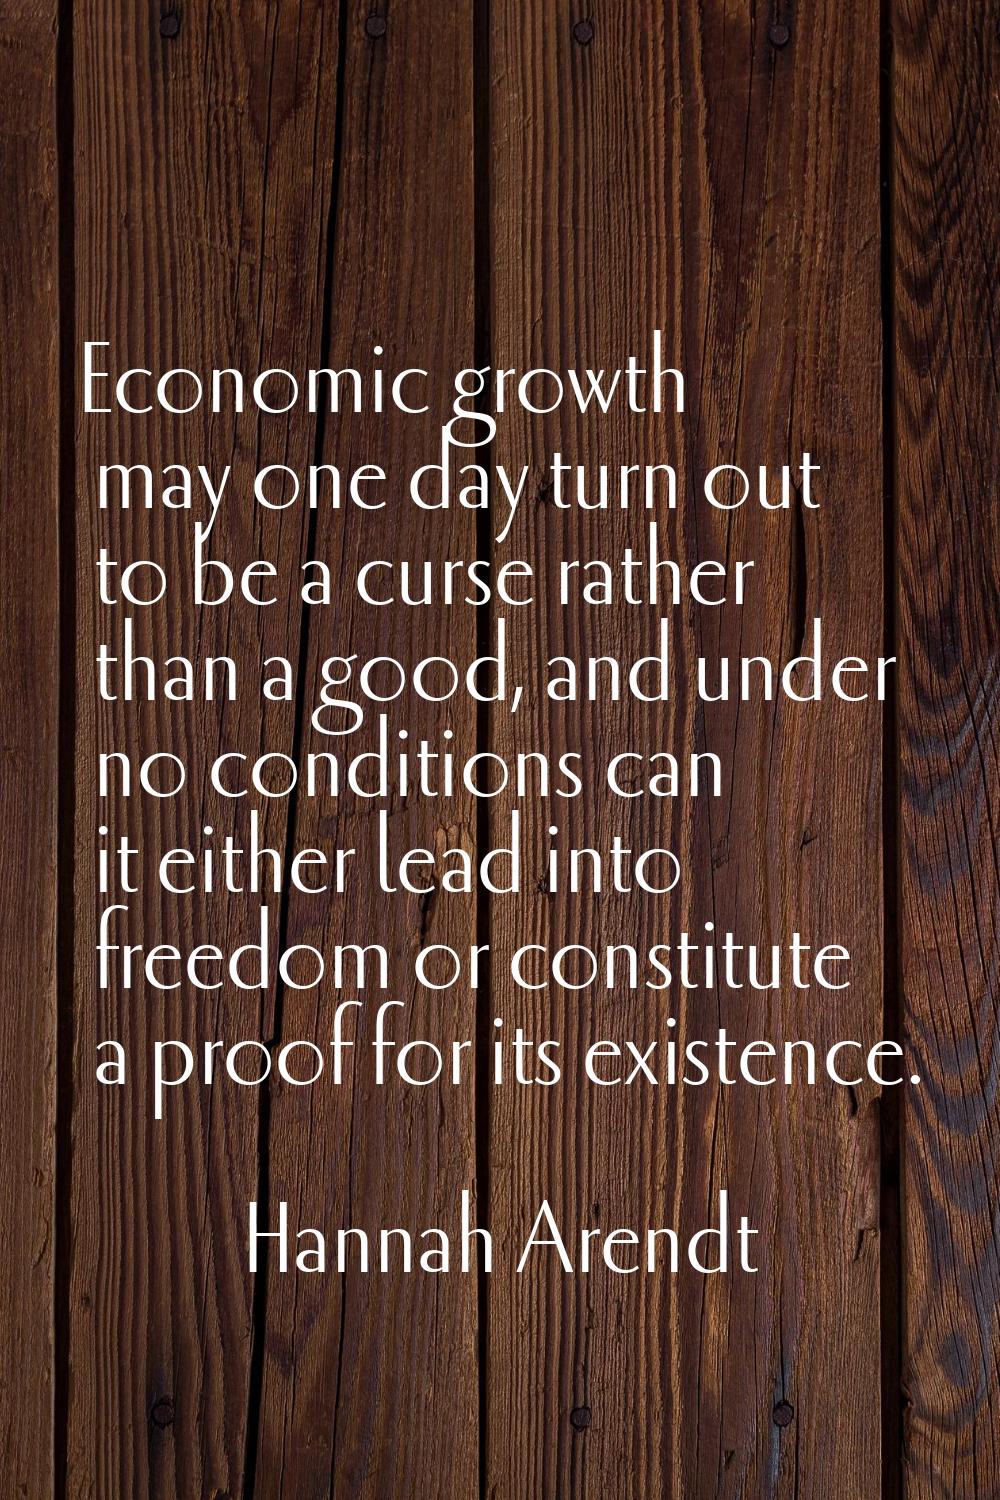 Economic growth may one day turn out to be a curse rather than a good, and under no conditions can 